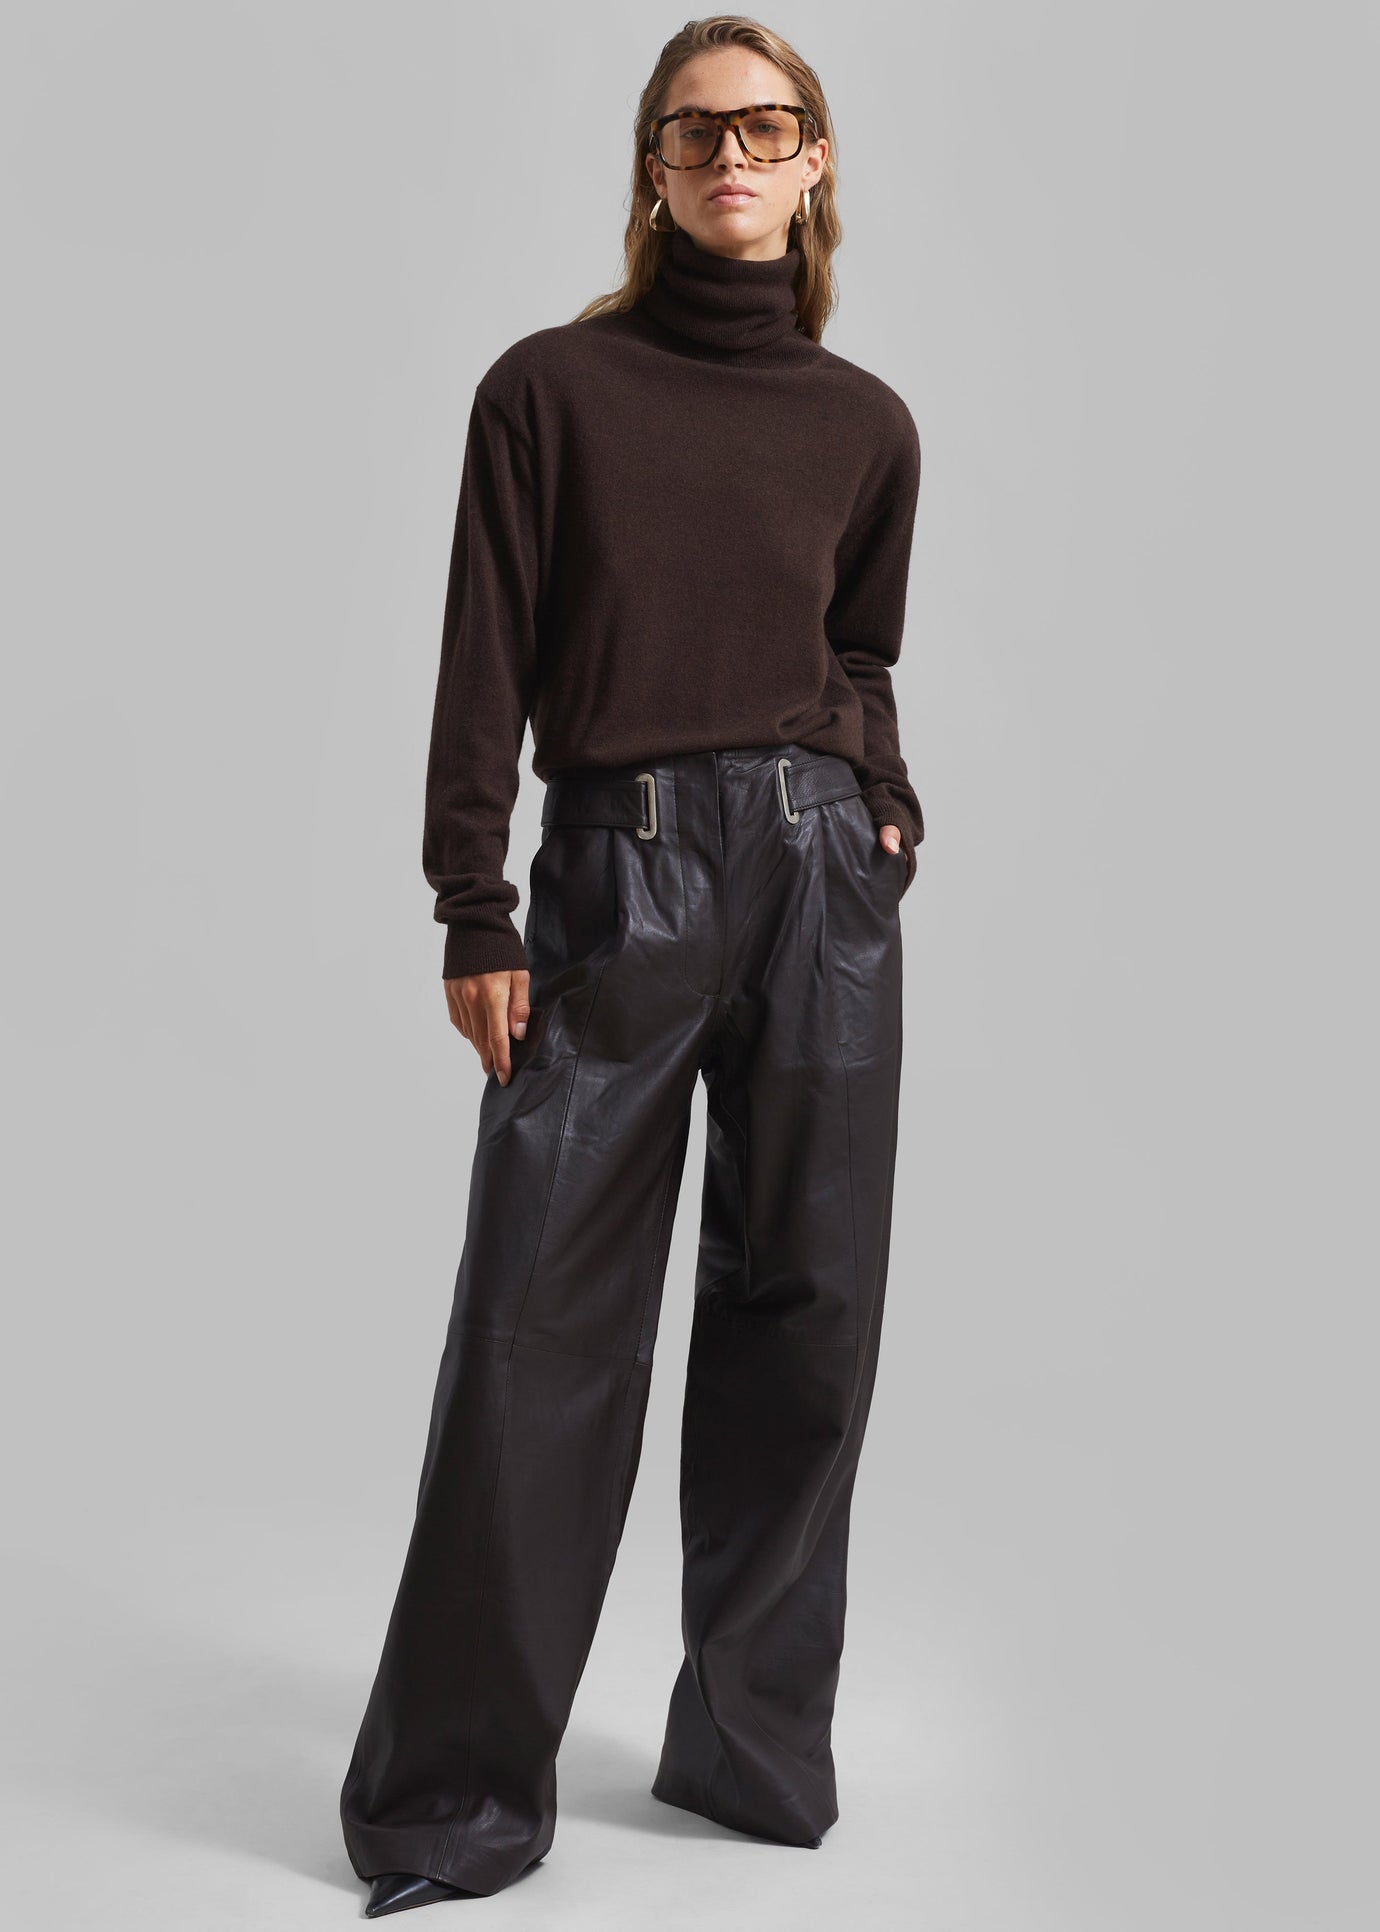 Ines Thin Padded Turtleneck - Brown - 1